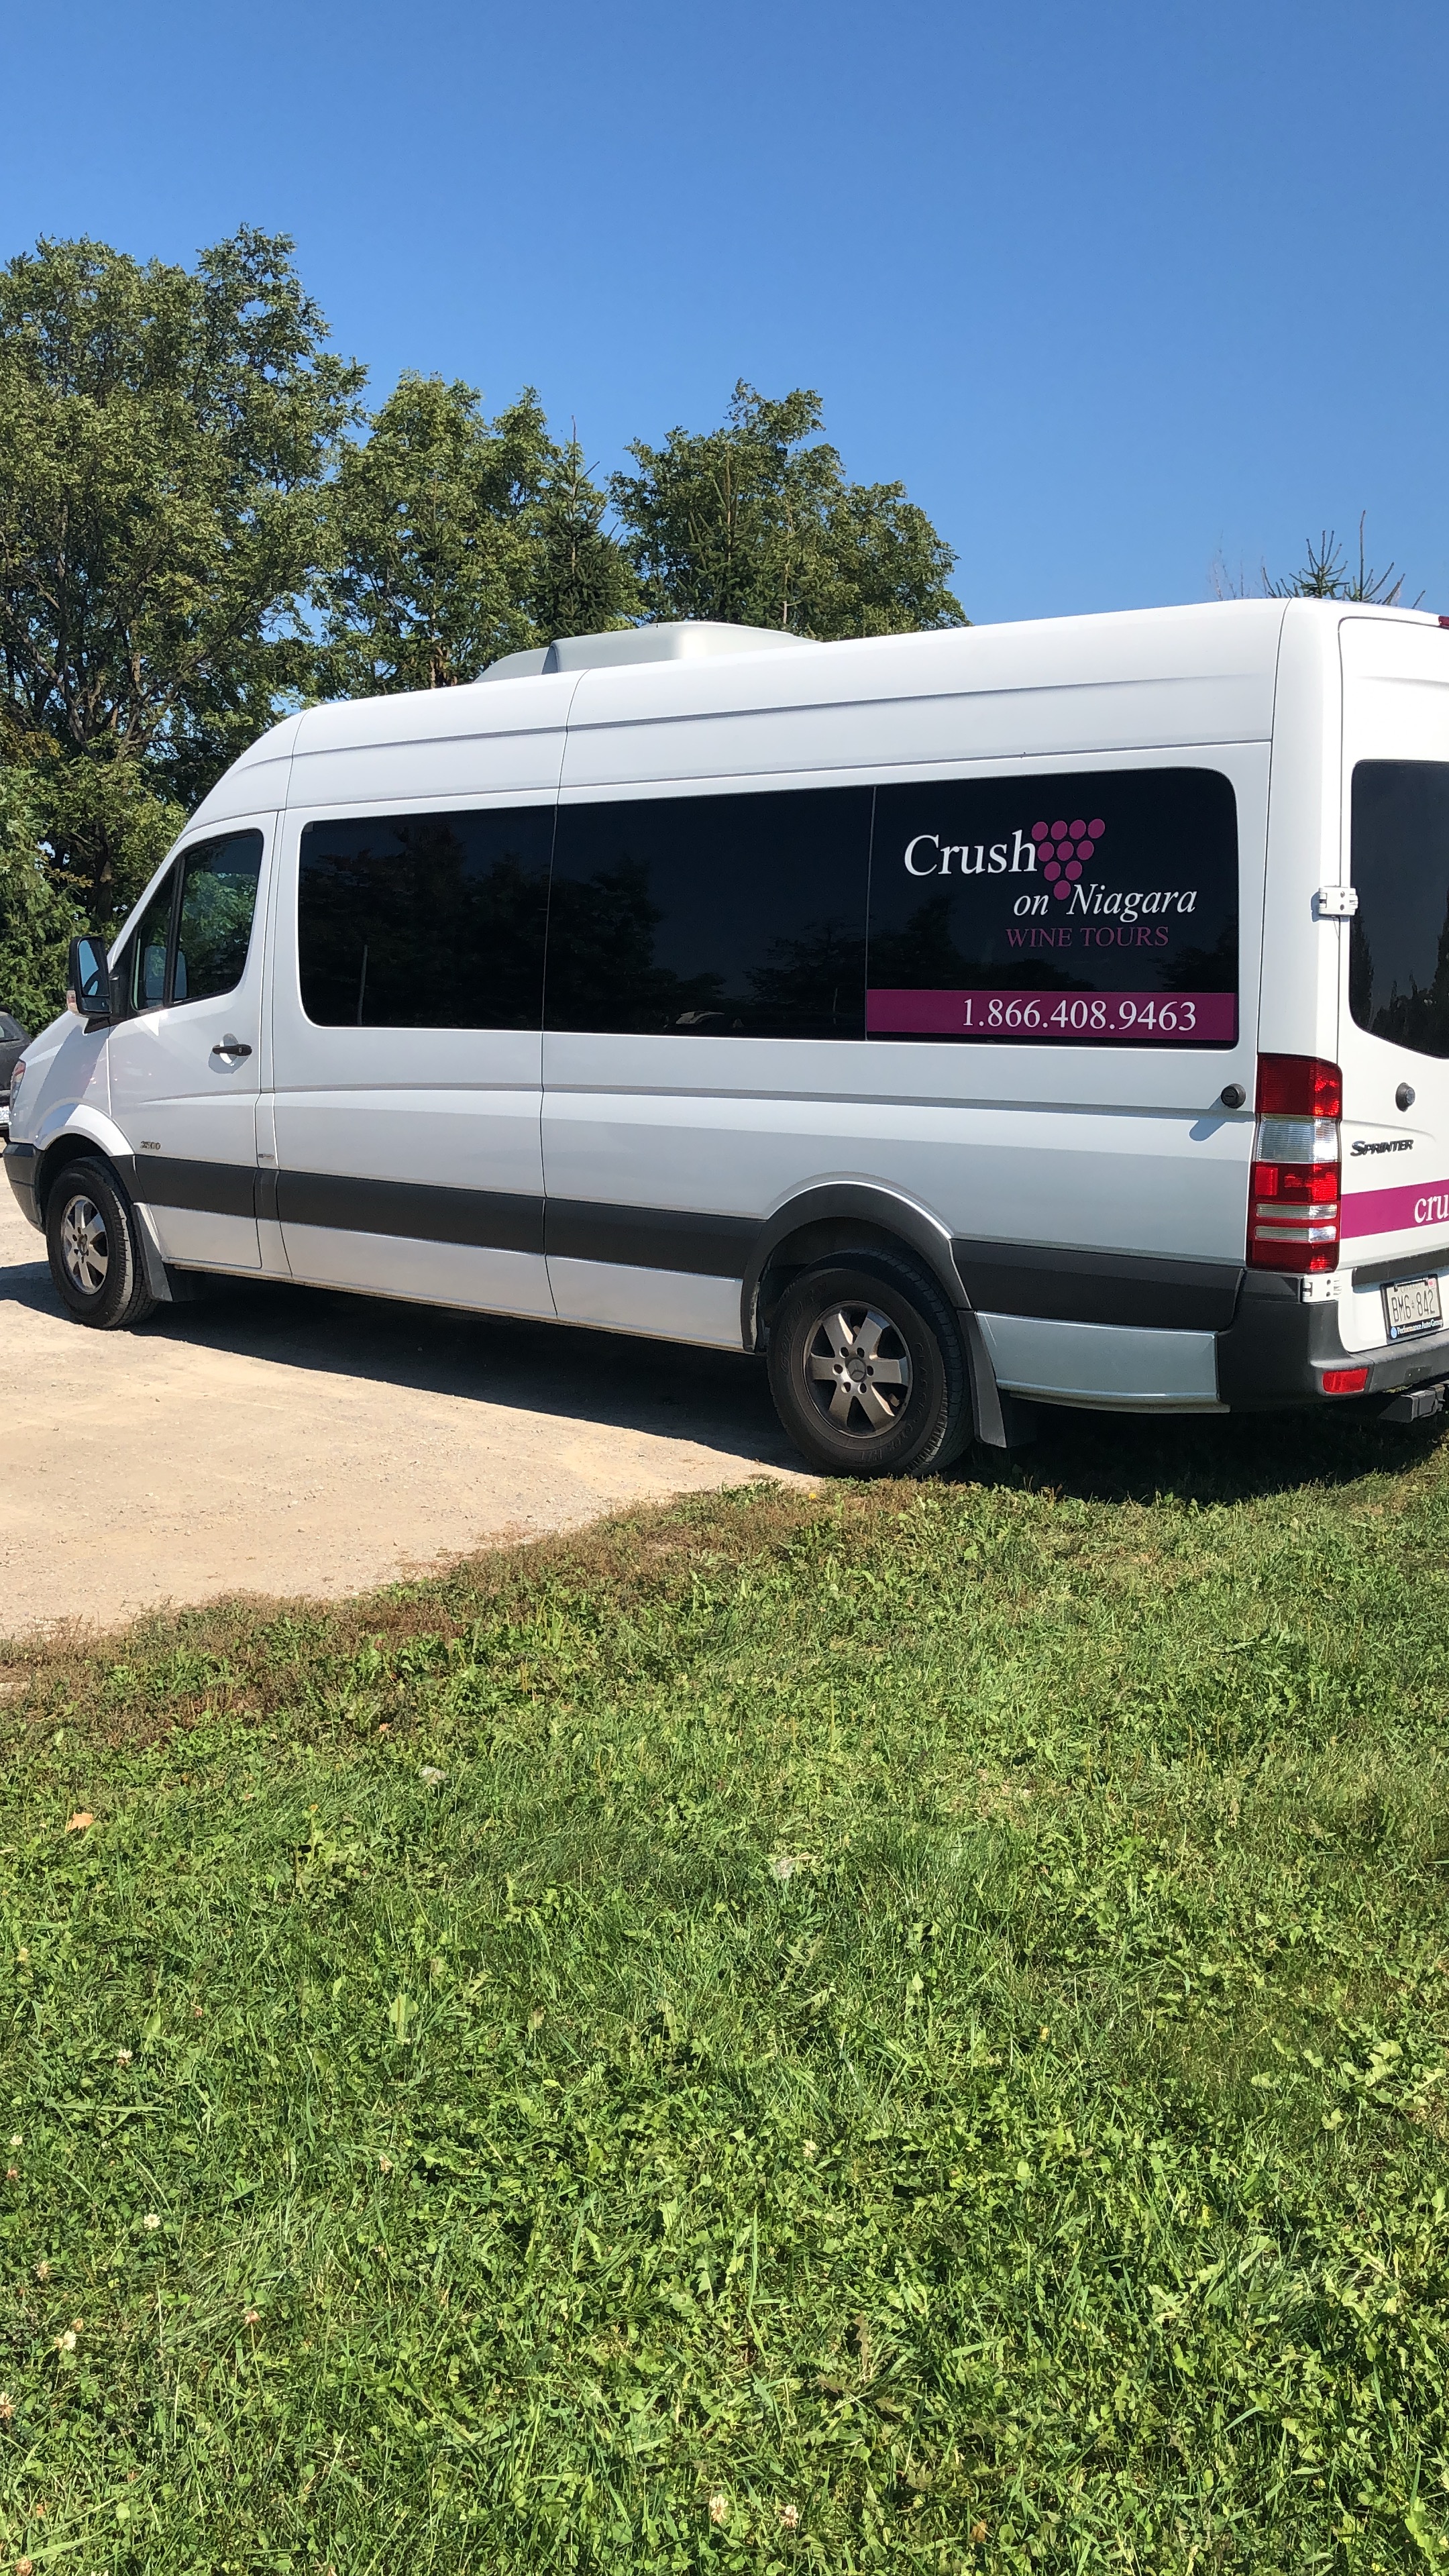 Crush Wine Tour Review on Livin' Life with Style